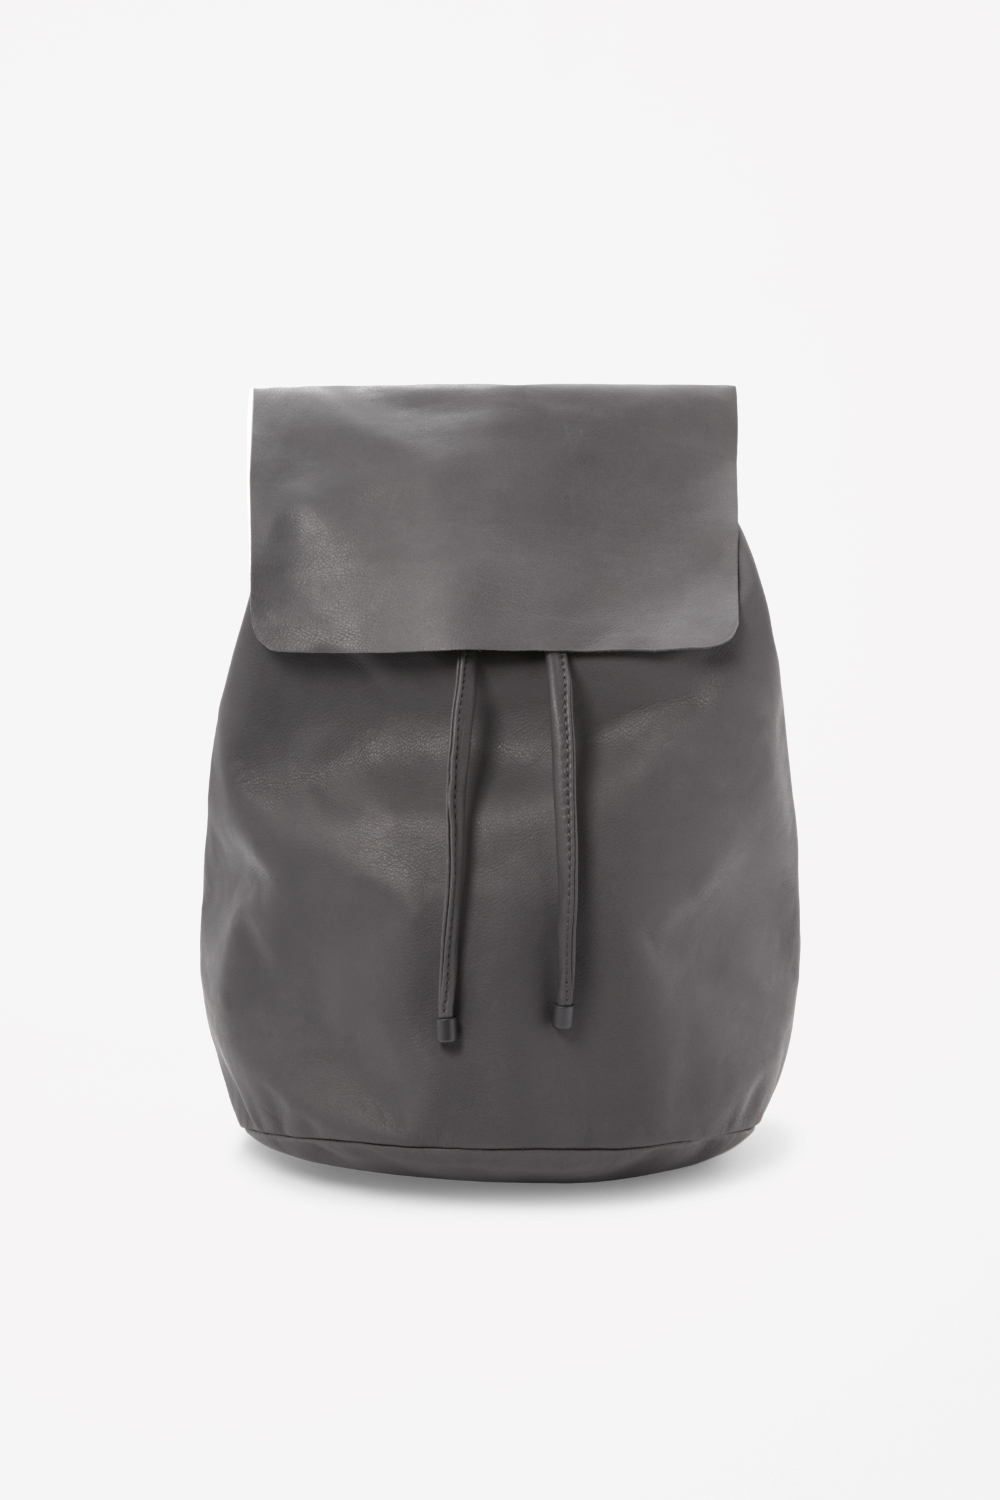 Cos Soft Leather Backpack in Gray (Dark Grey) | Lyst